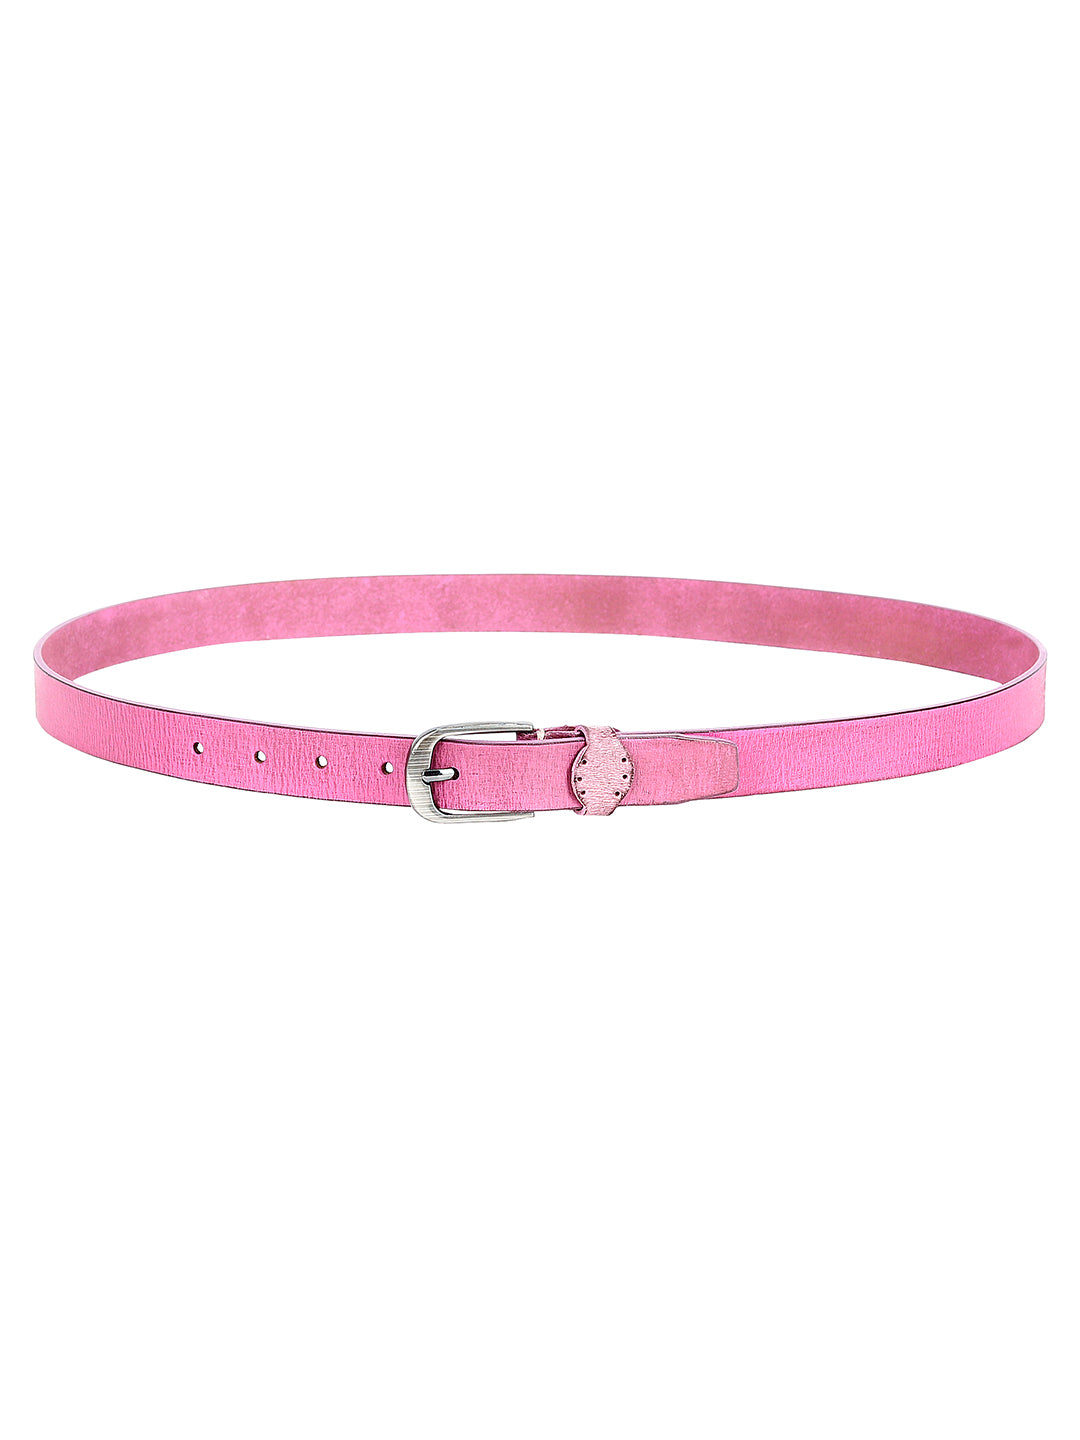 Women Casual, Evening, Party, Formal Pink Genuine Leather Belt